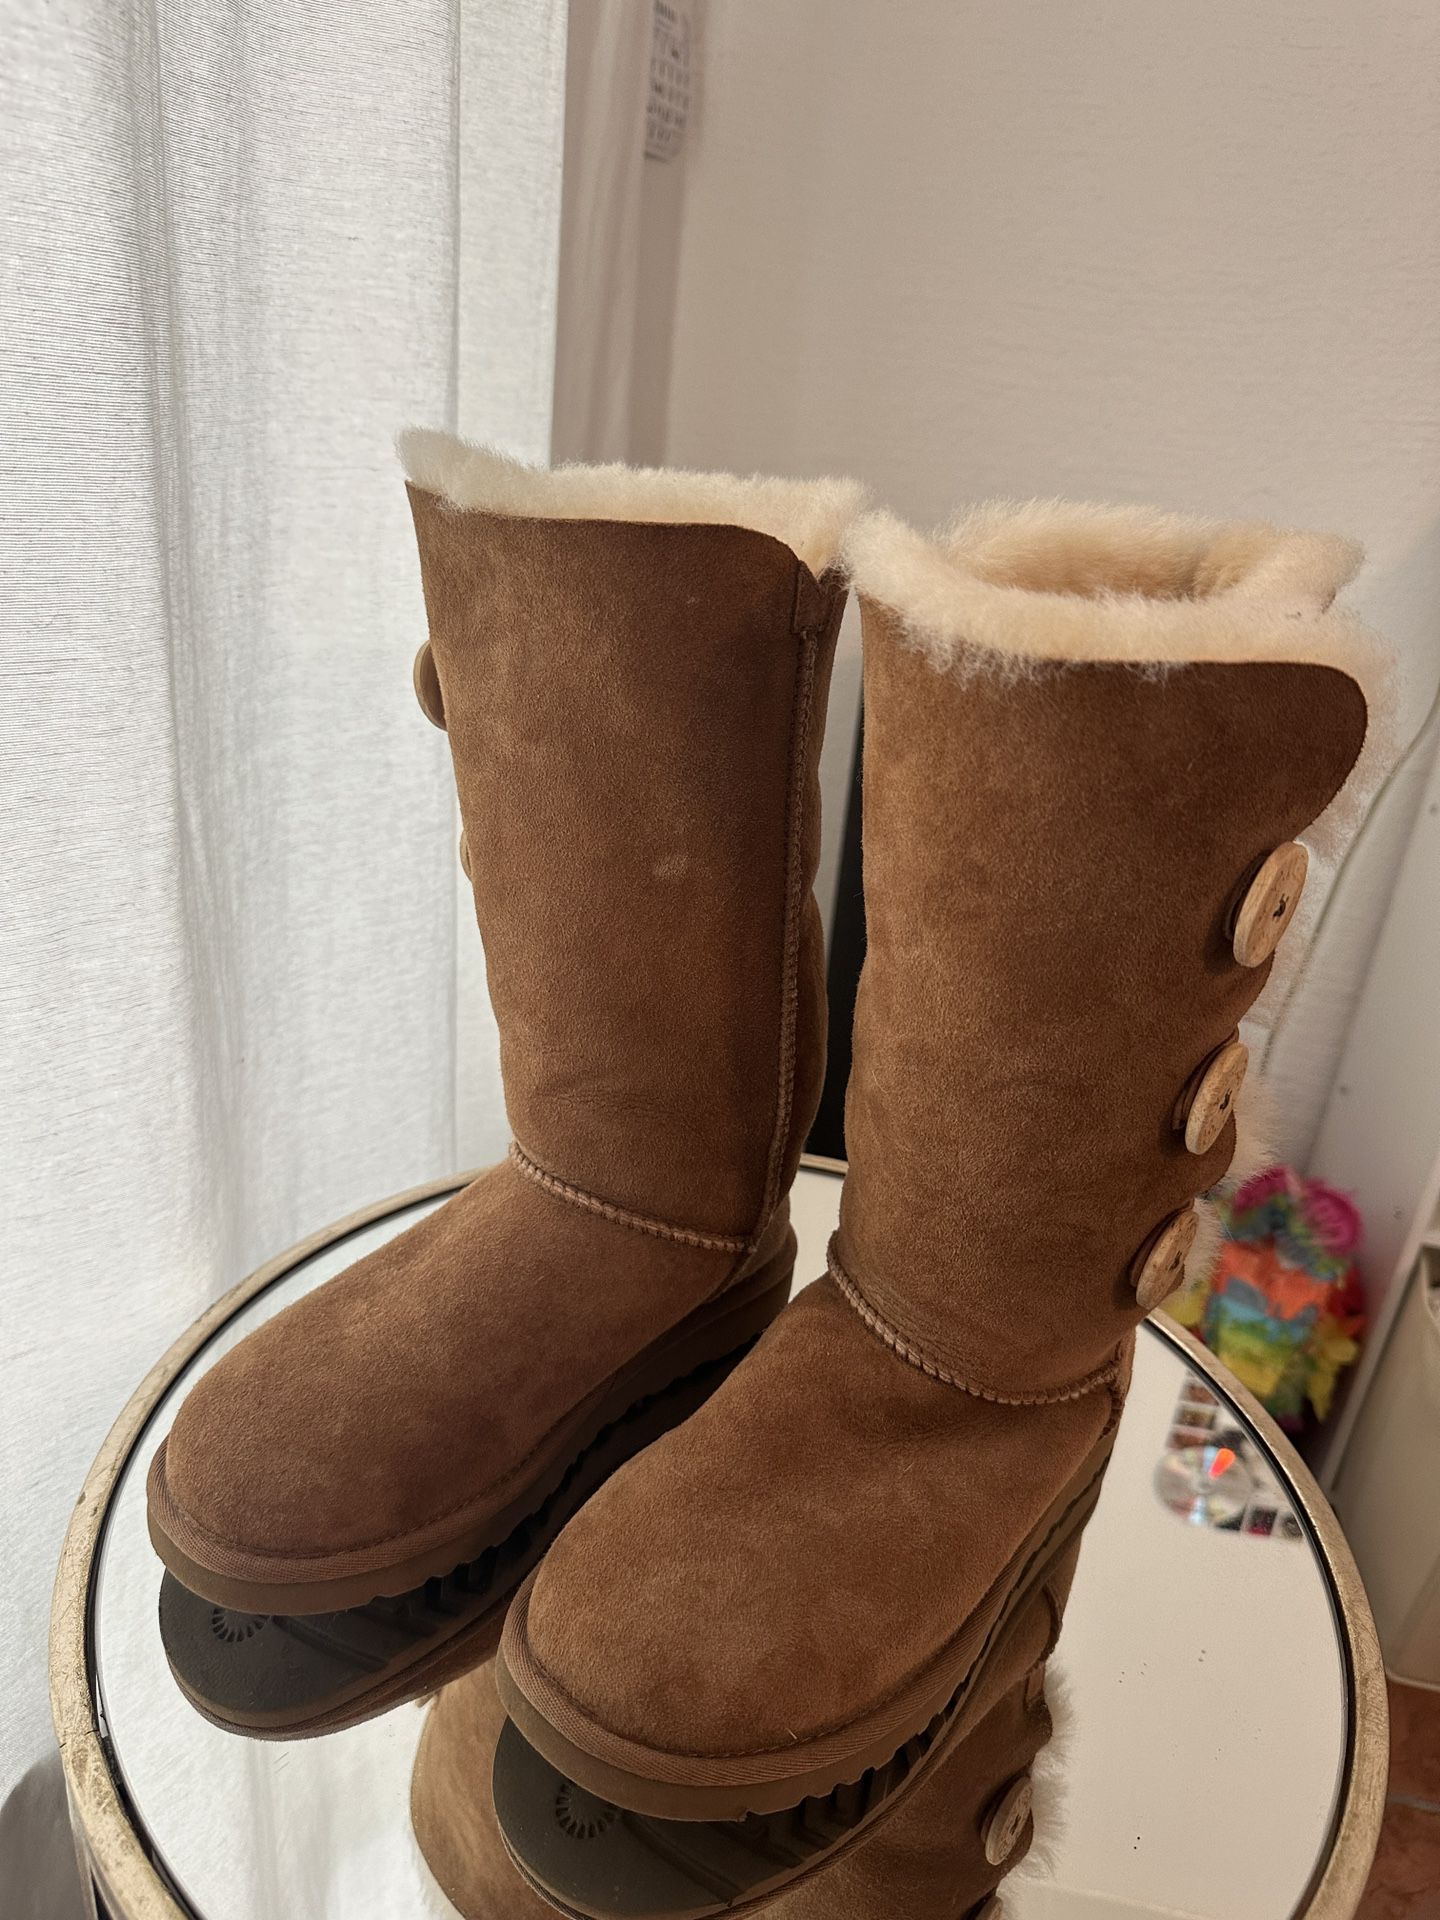 UGG BOOTS *SIZE 6* CAMEL/BROWN/TAN